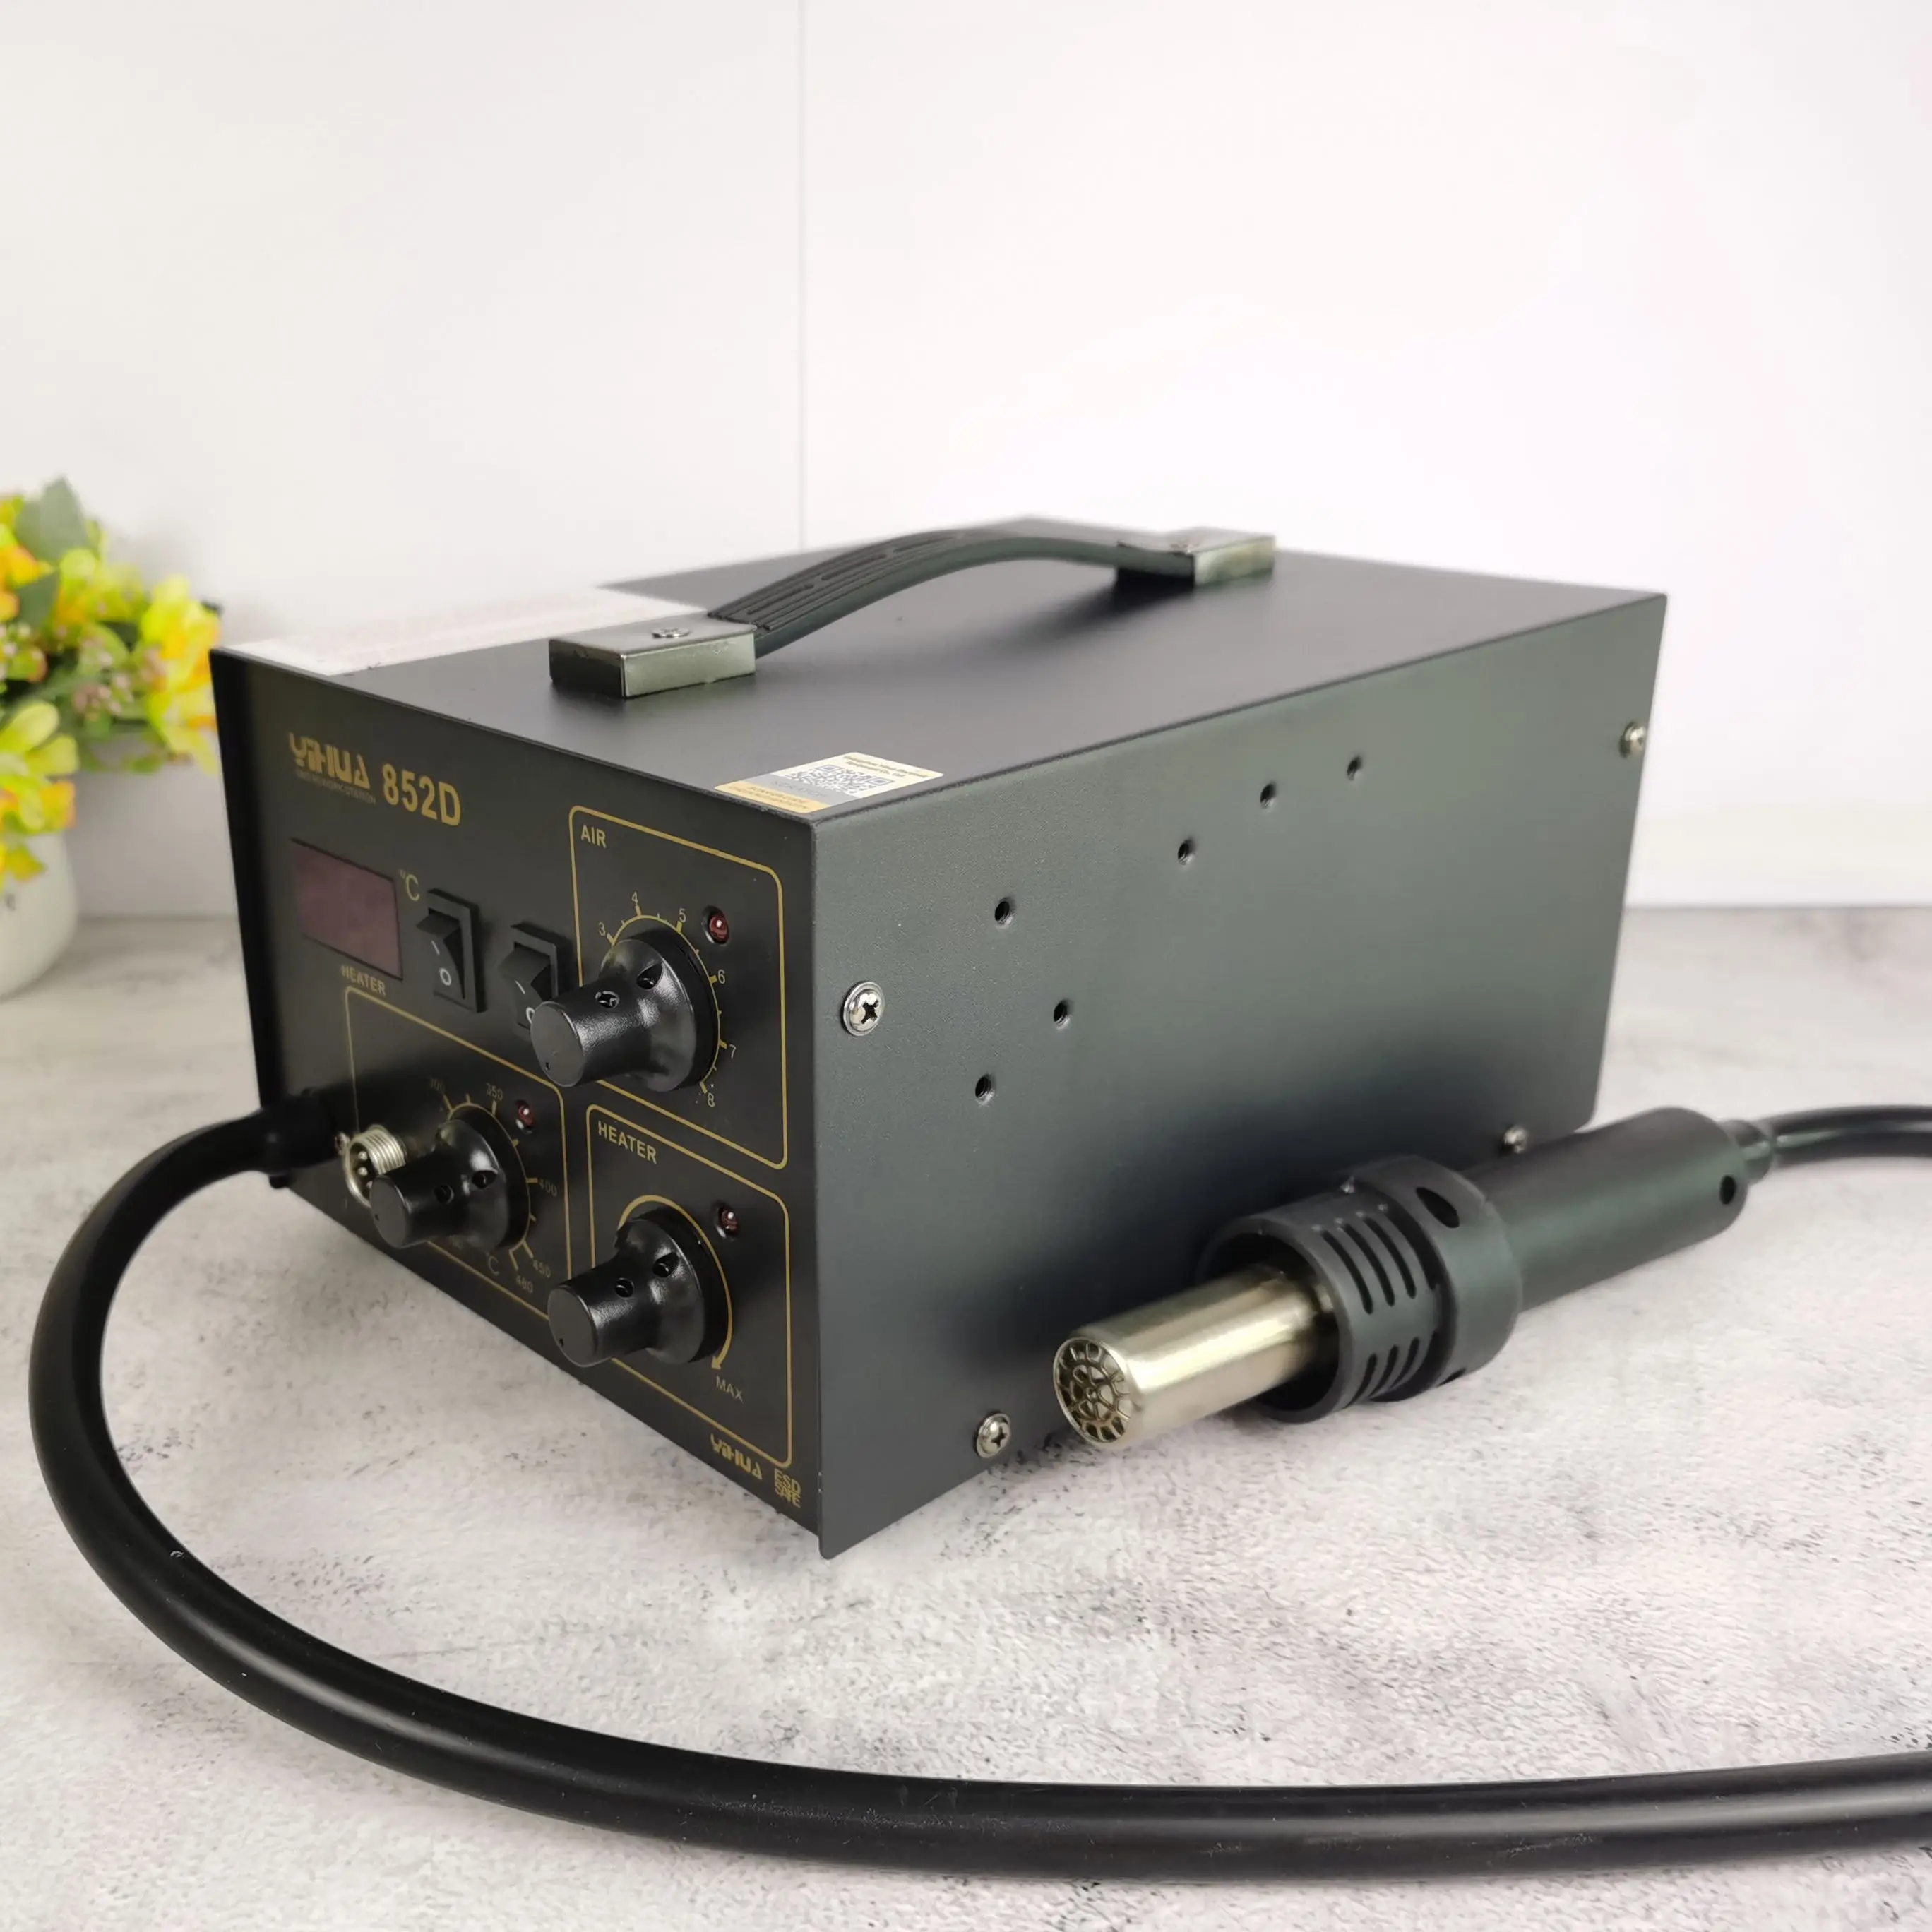 

YIHUA 852D Hot Air Soldering Station With Soldering Iron Heat Gun Tool BGA Welding Station SMD Desoldering Station